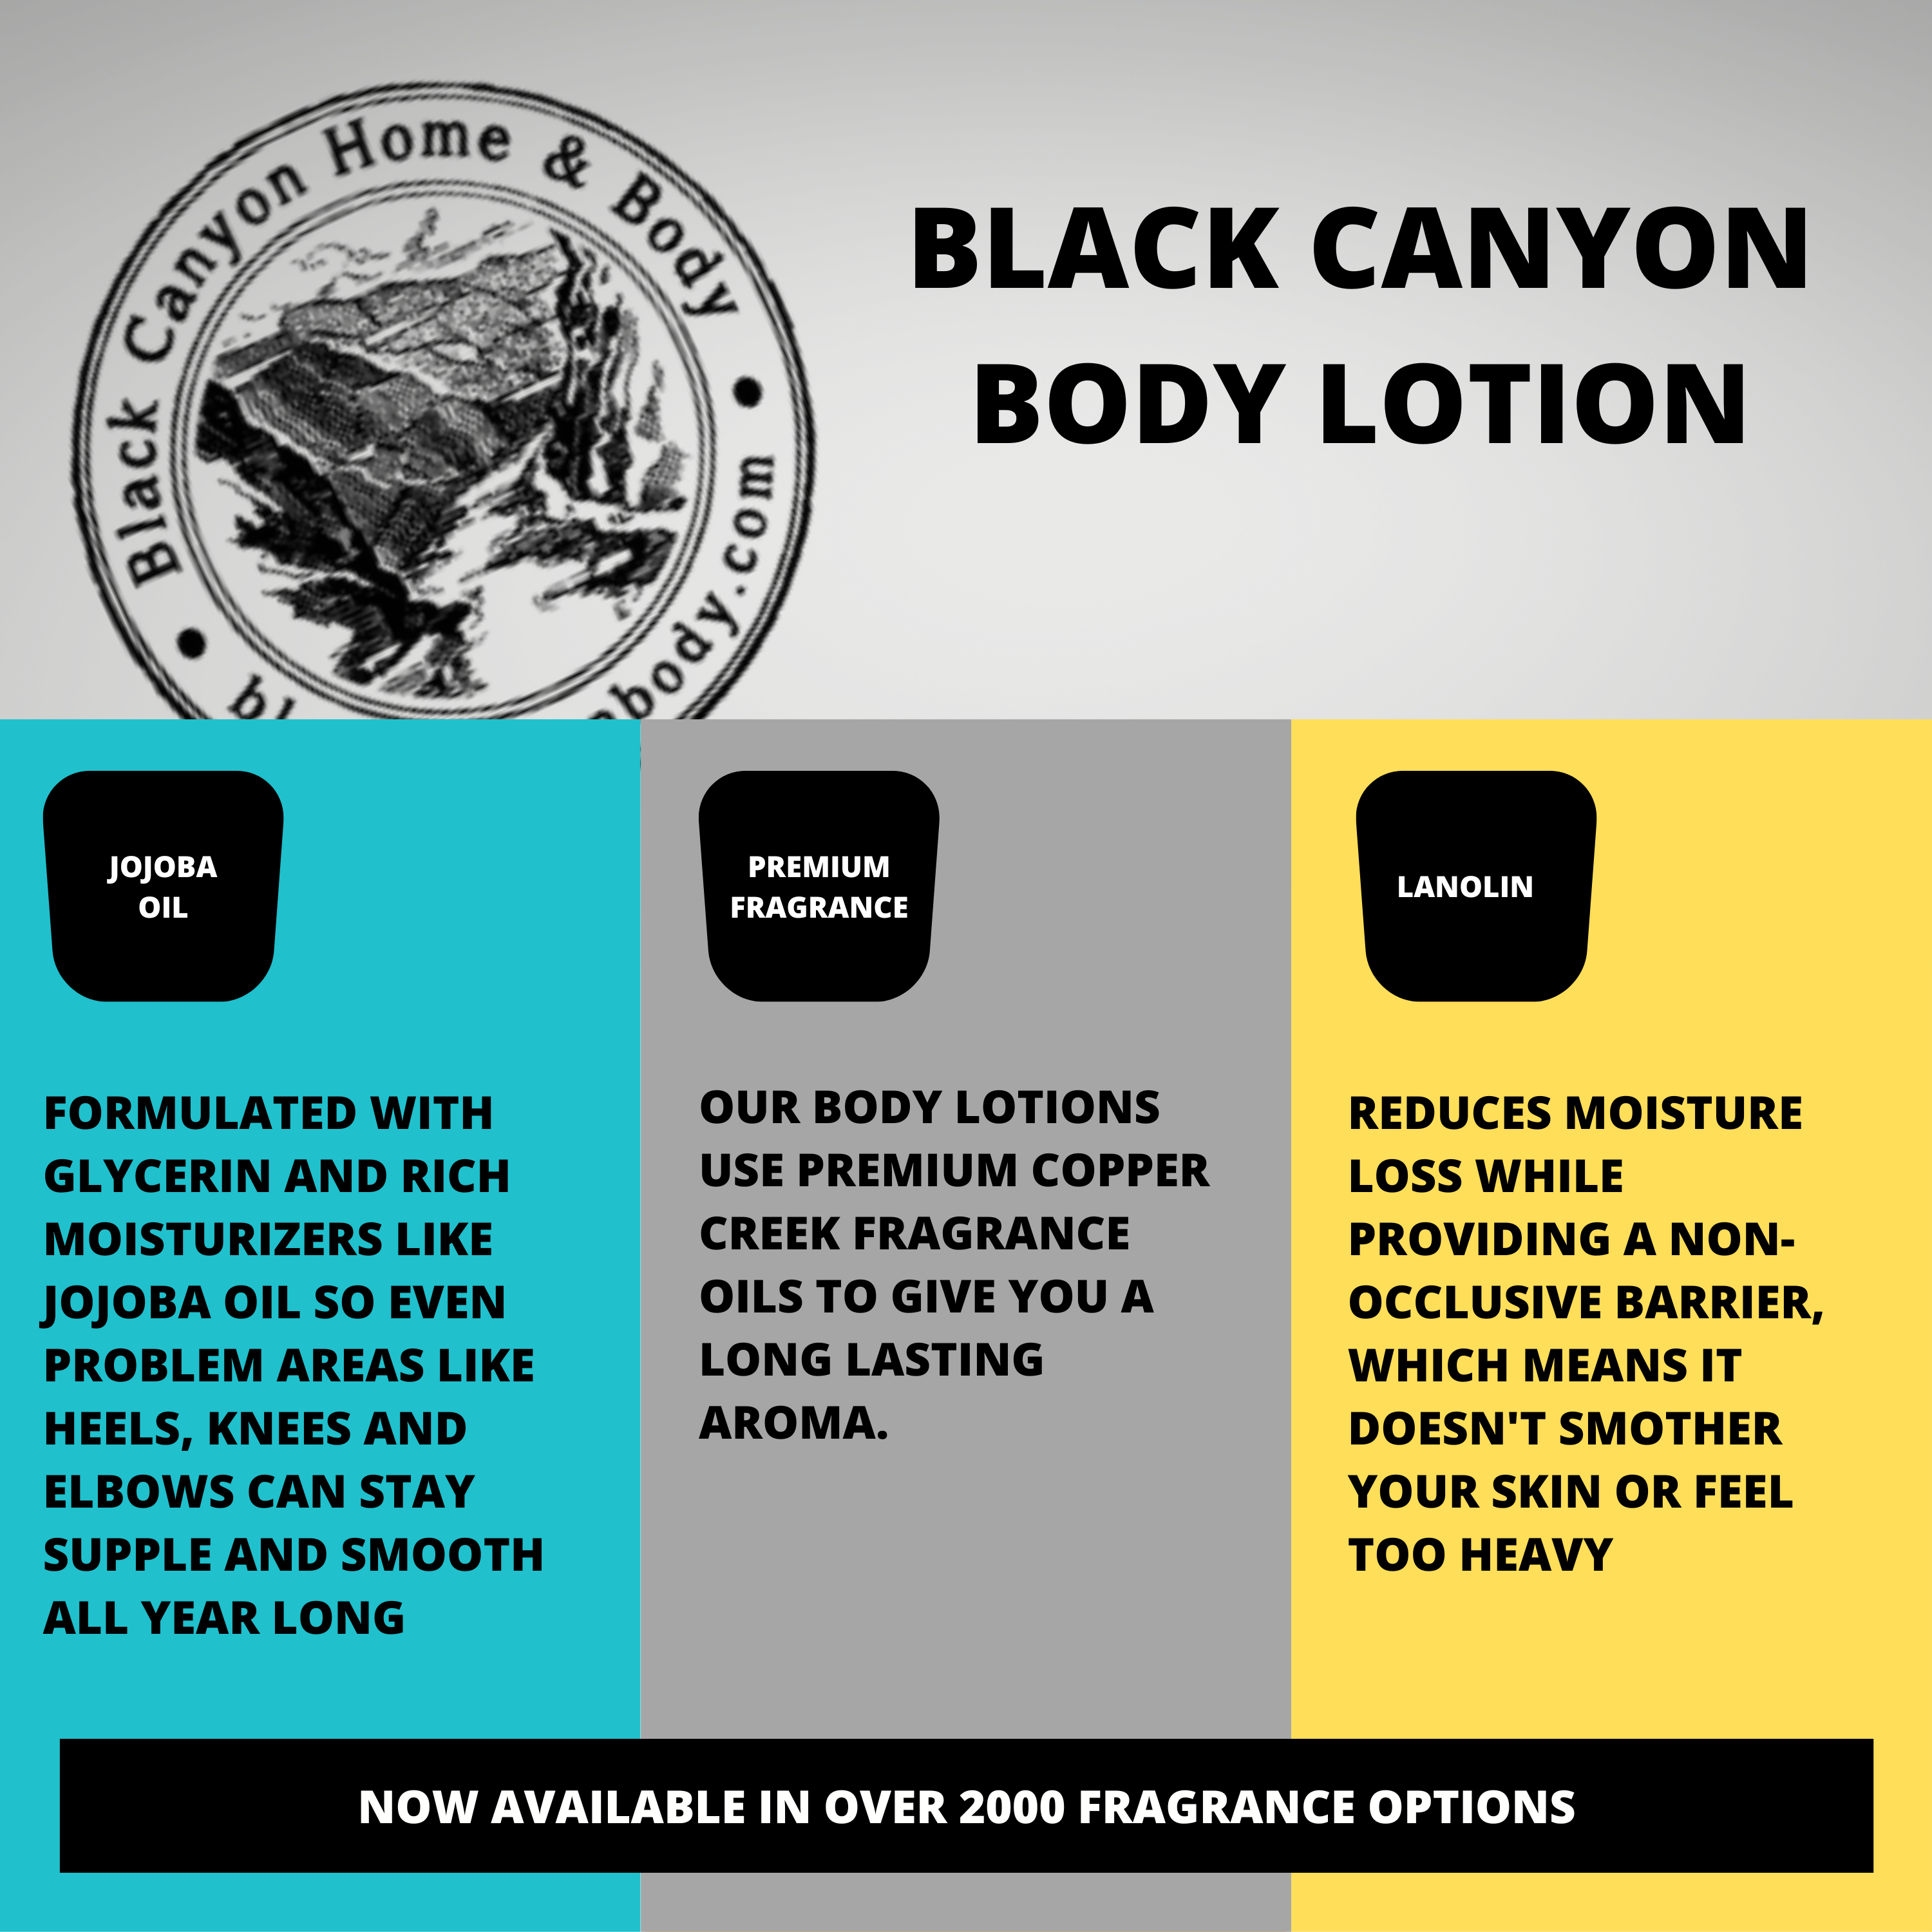 Black Canyon Lemon Mint Scented Luxury Body Lotion with Lanolin and Jojoba Oil